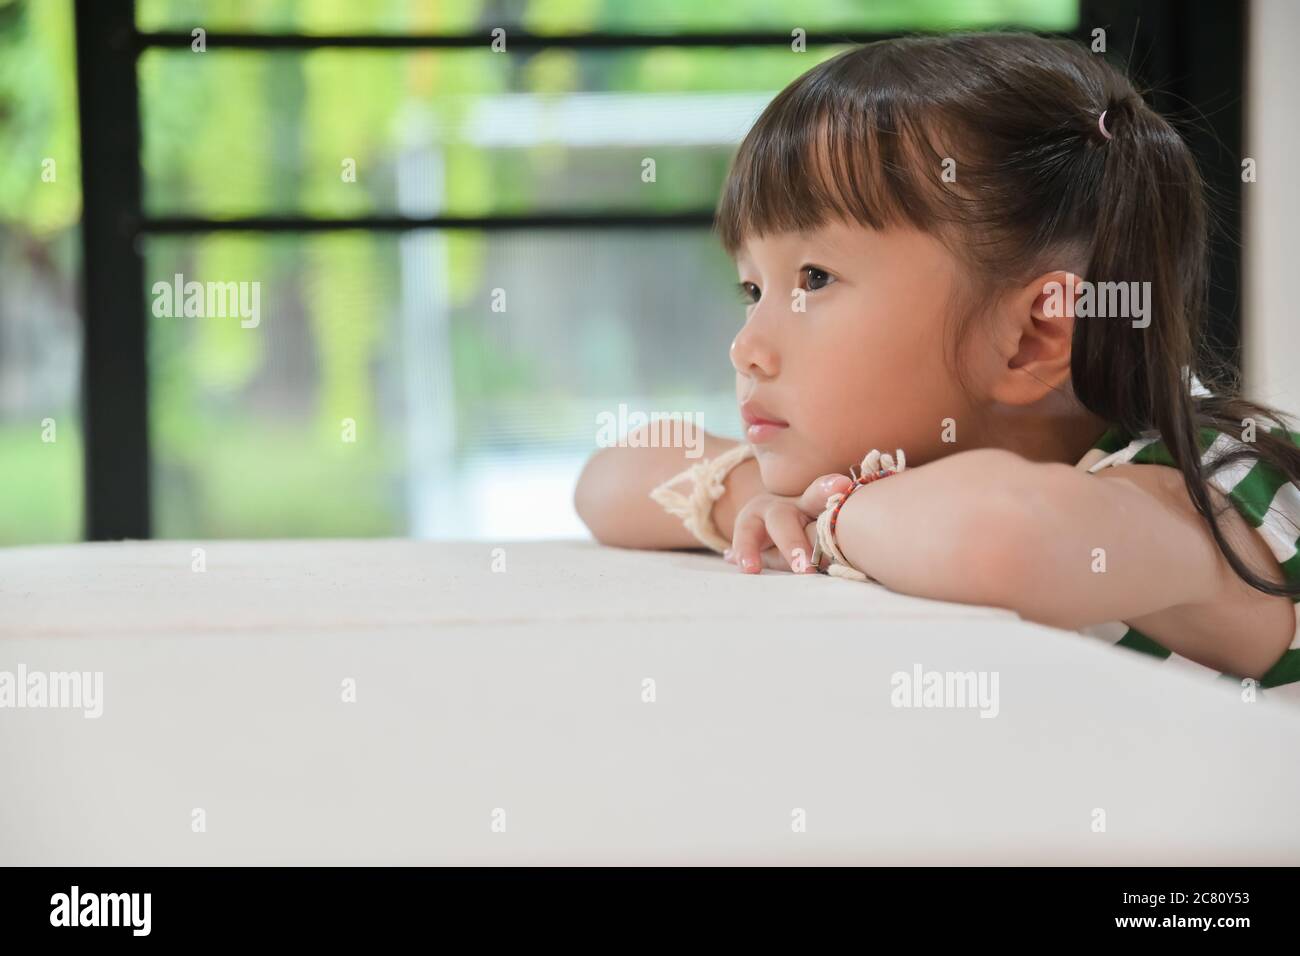 little girl sitting vacant on table feeling empty living without meaning looking forward to no point ,she sad brooded over the bullying done to her Stock Photo